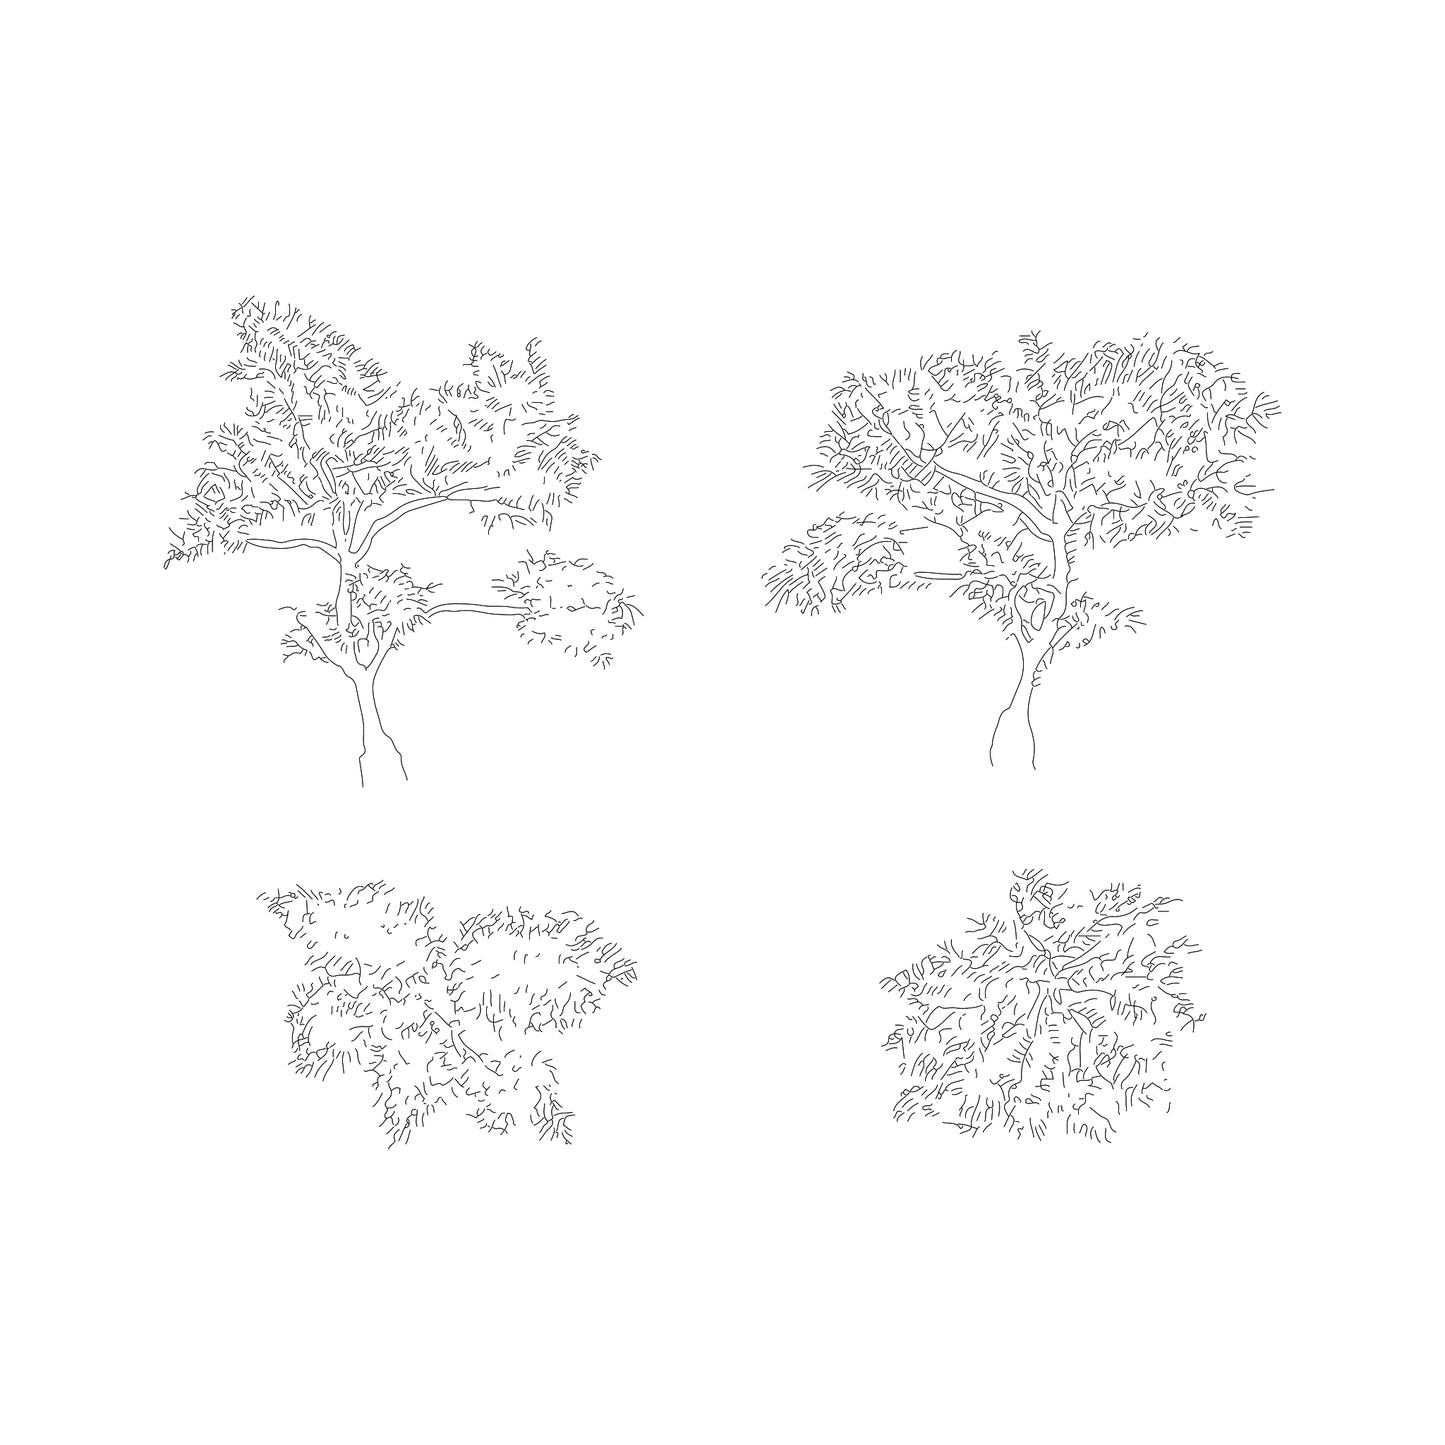 CAD drawings of two japanese plants in plan and elevation. Black and white